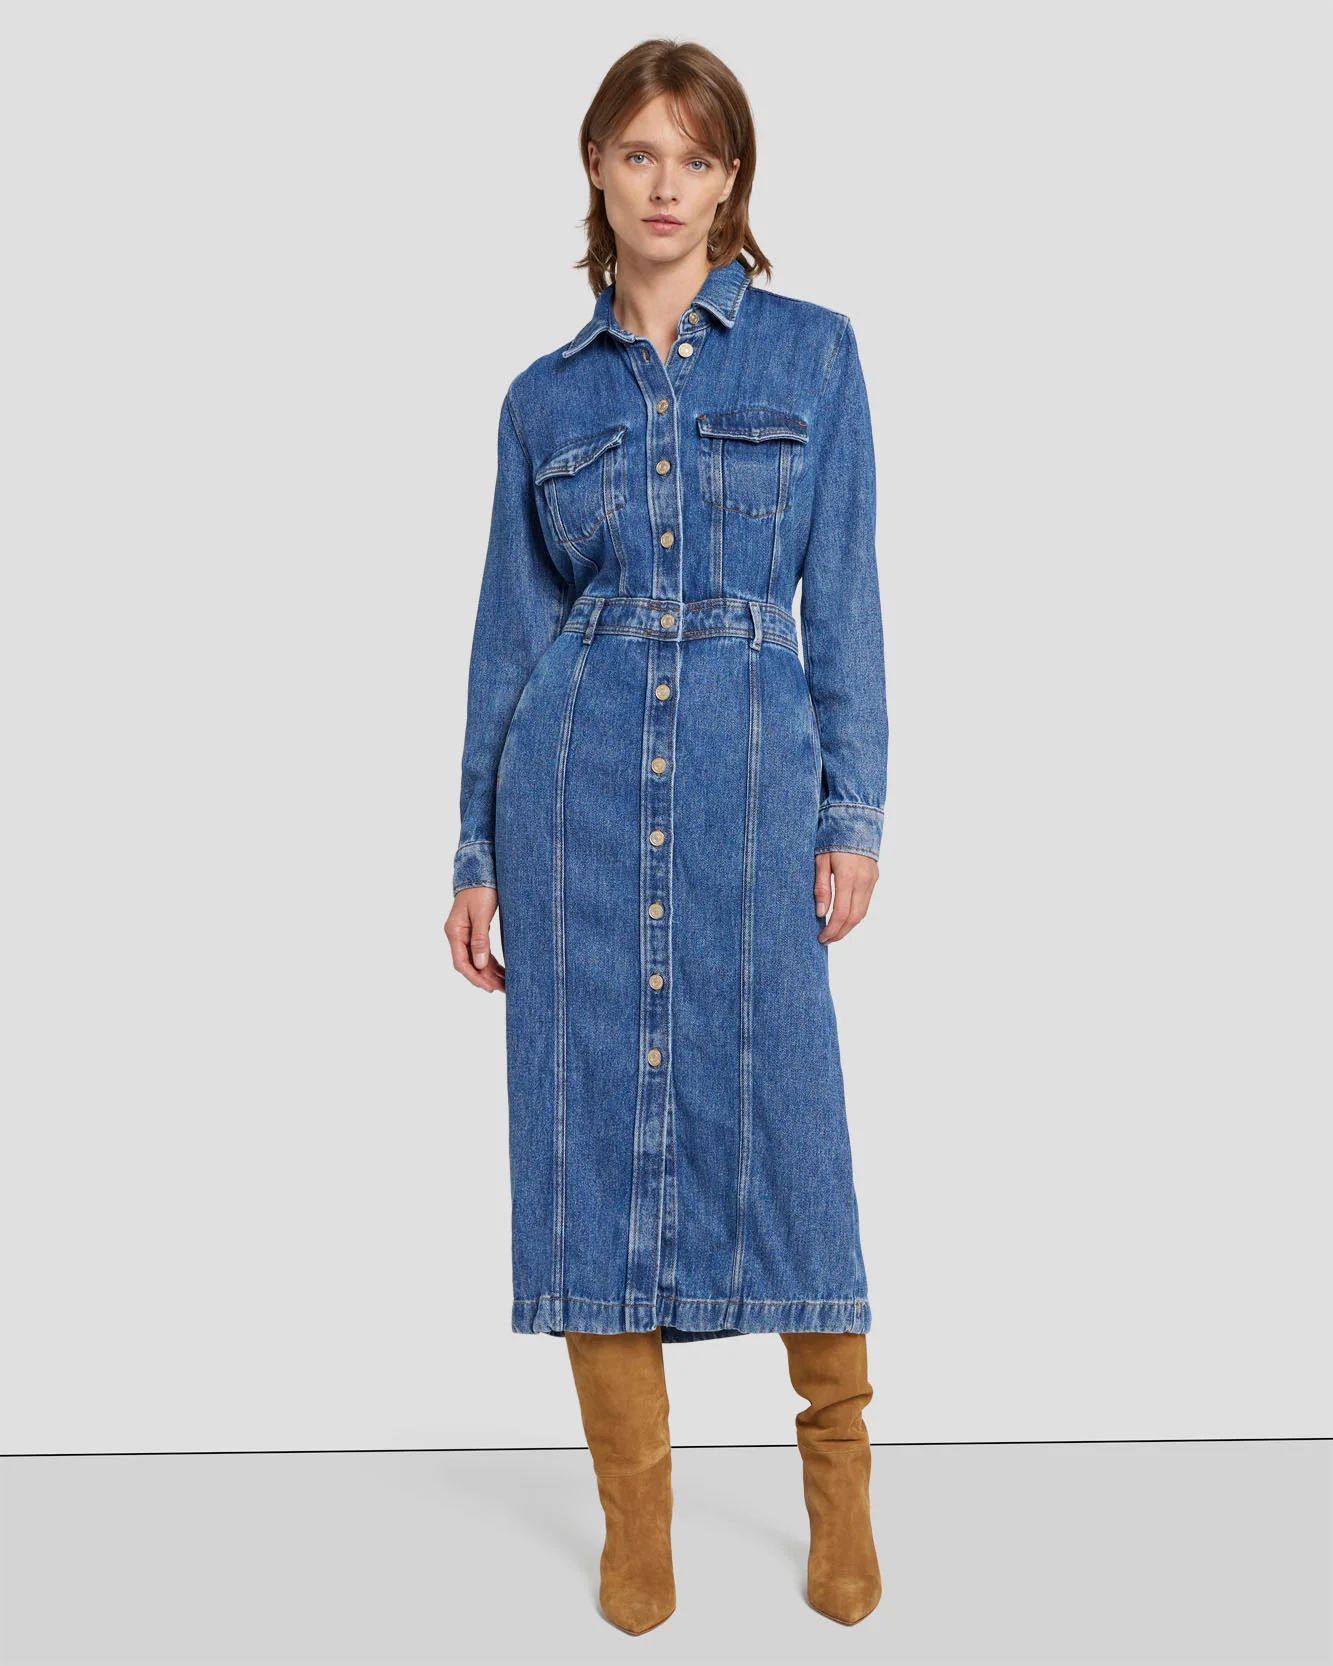 Denim Lustre Luxe Dress in Daylily | 7 For All Mankind